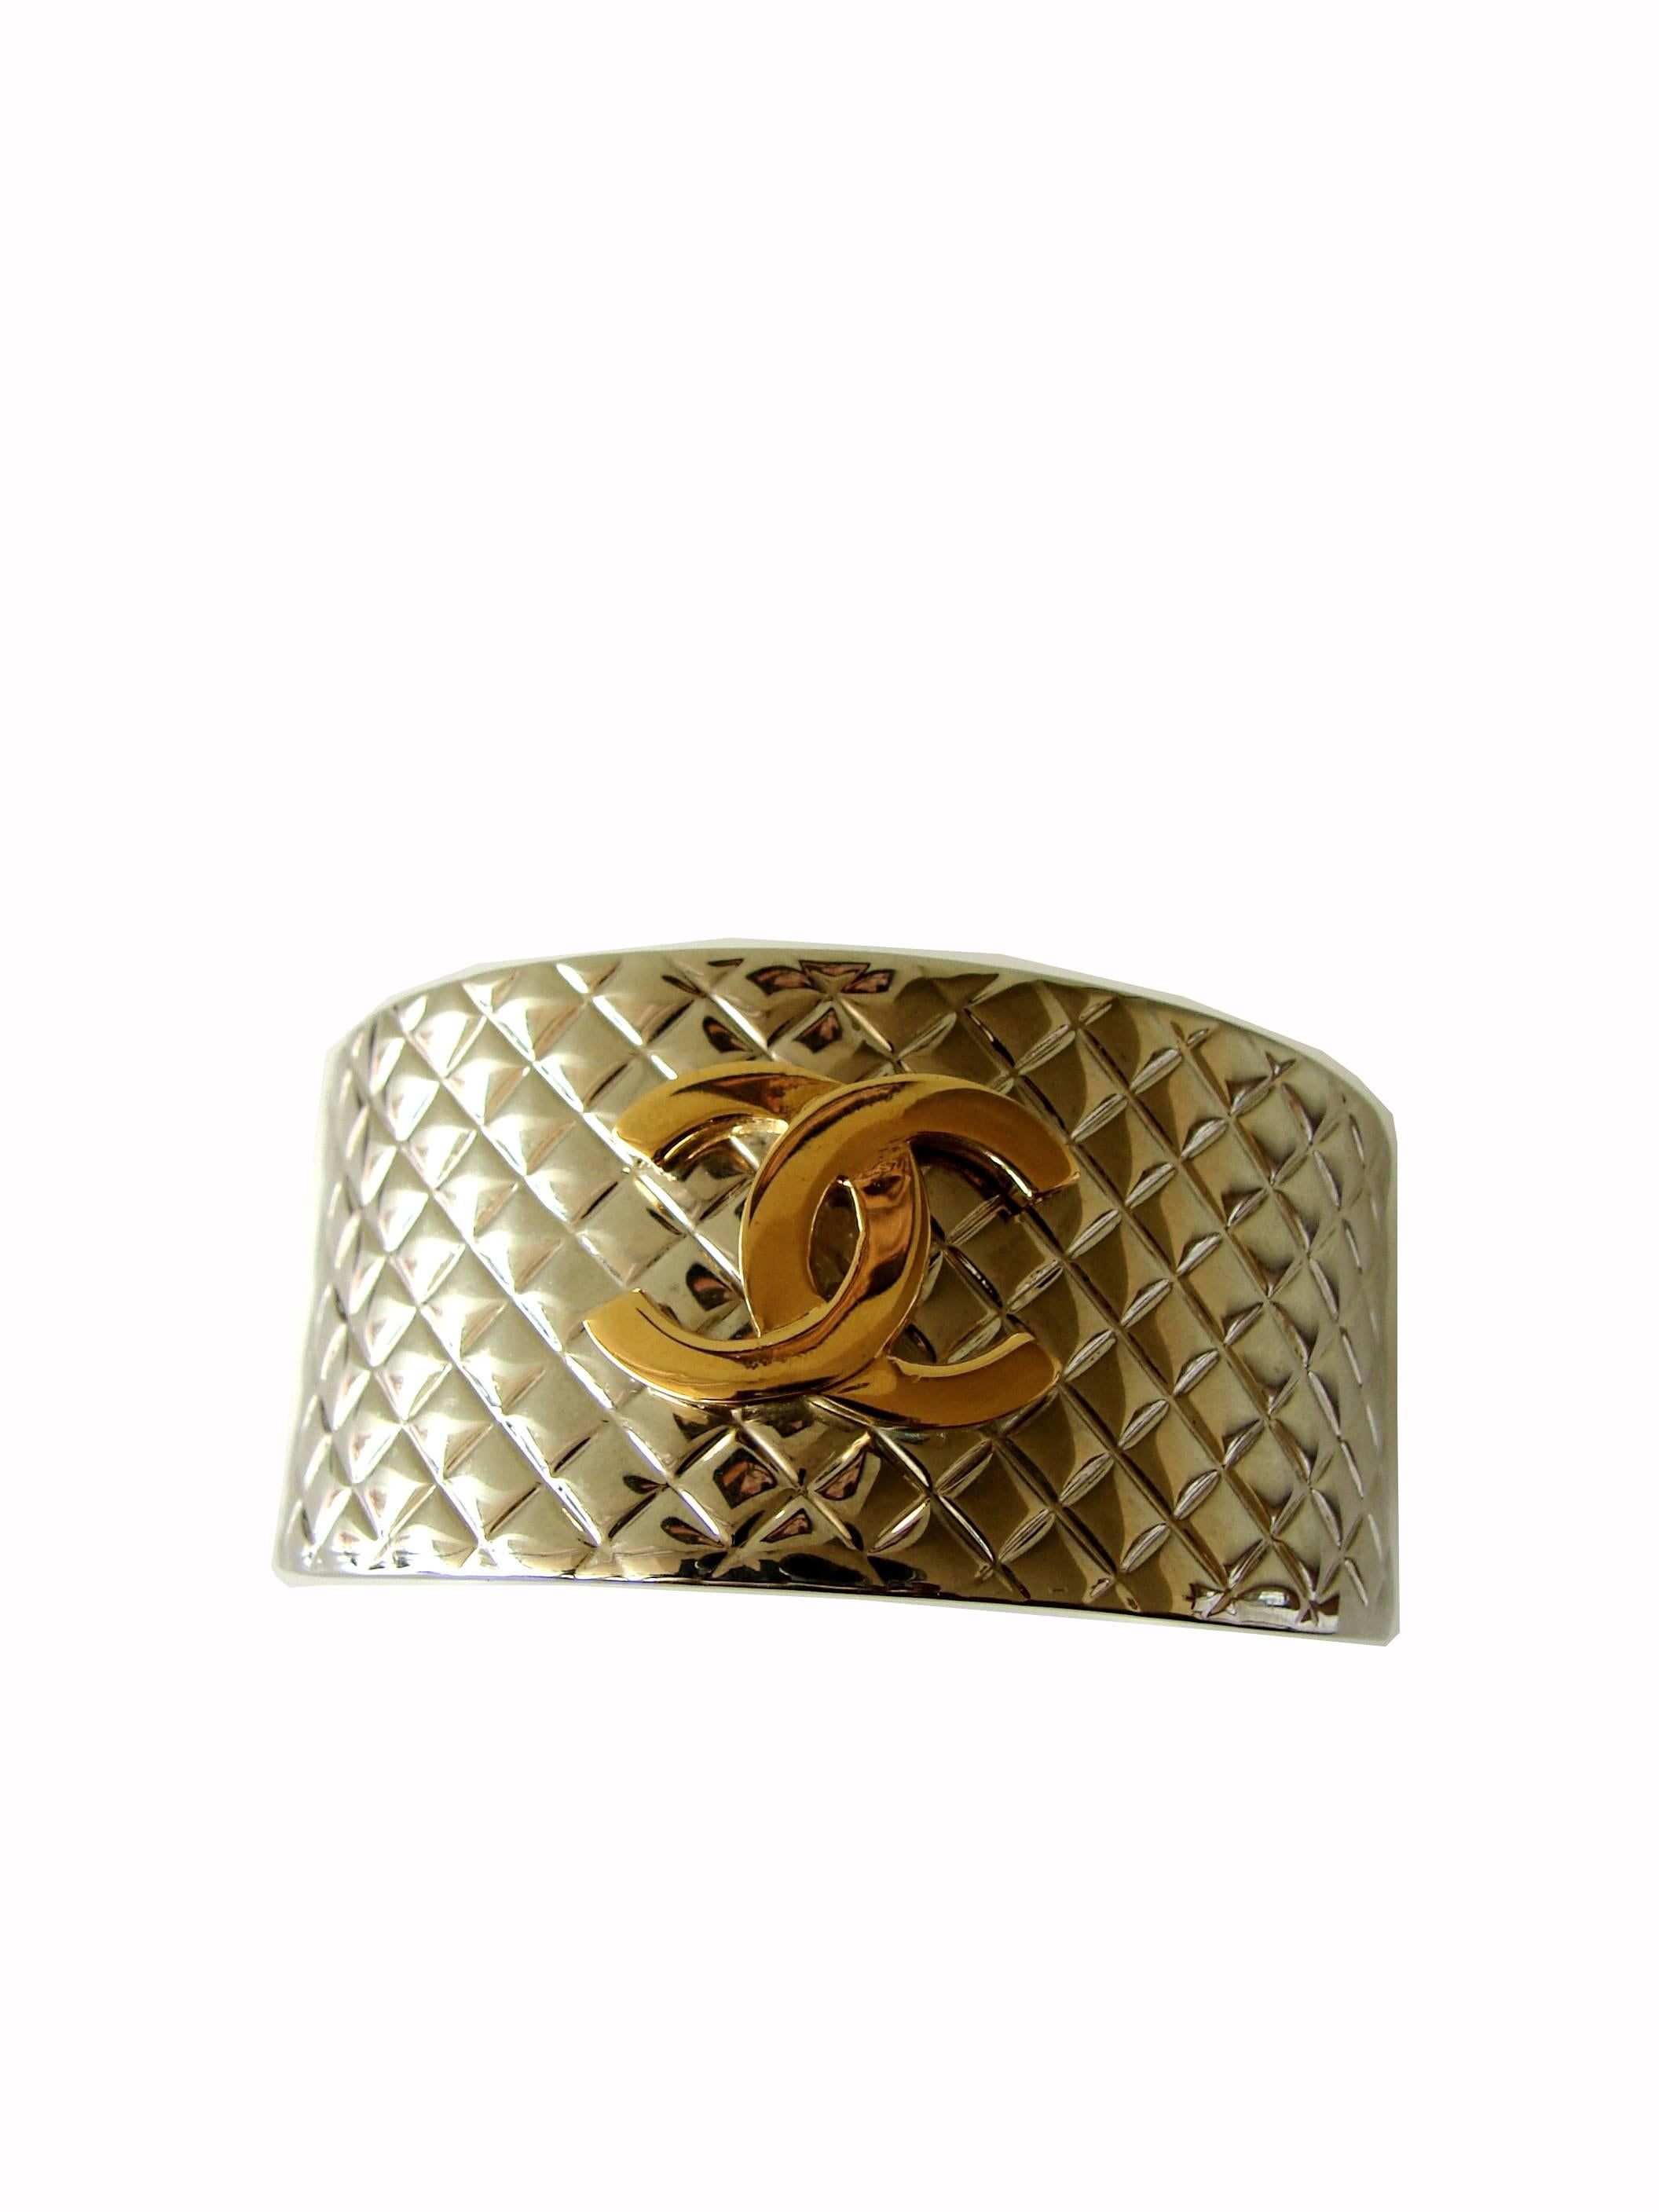 Contemporary Chanel Silver Matalasse Cuff Bracelet with Gold CC Logo + Box 98P Collection 